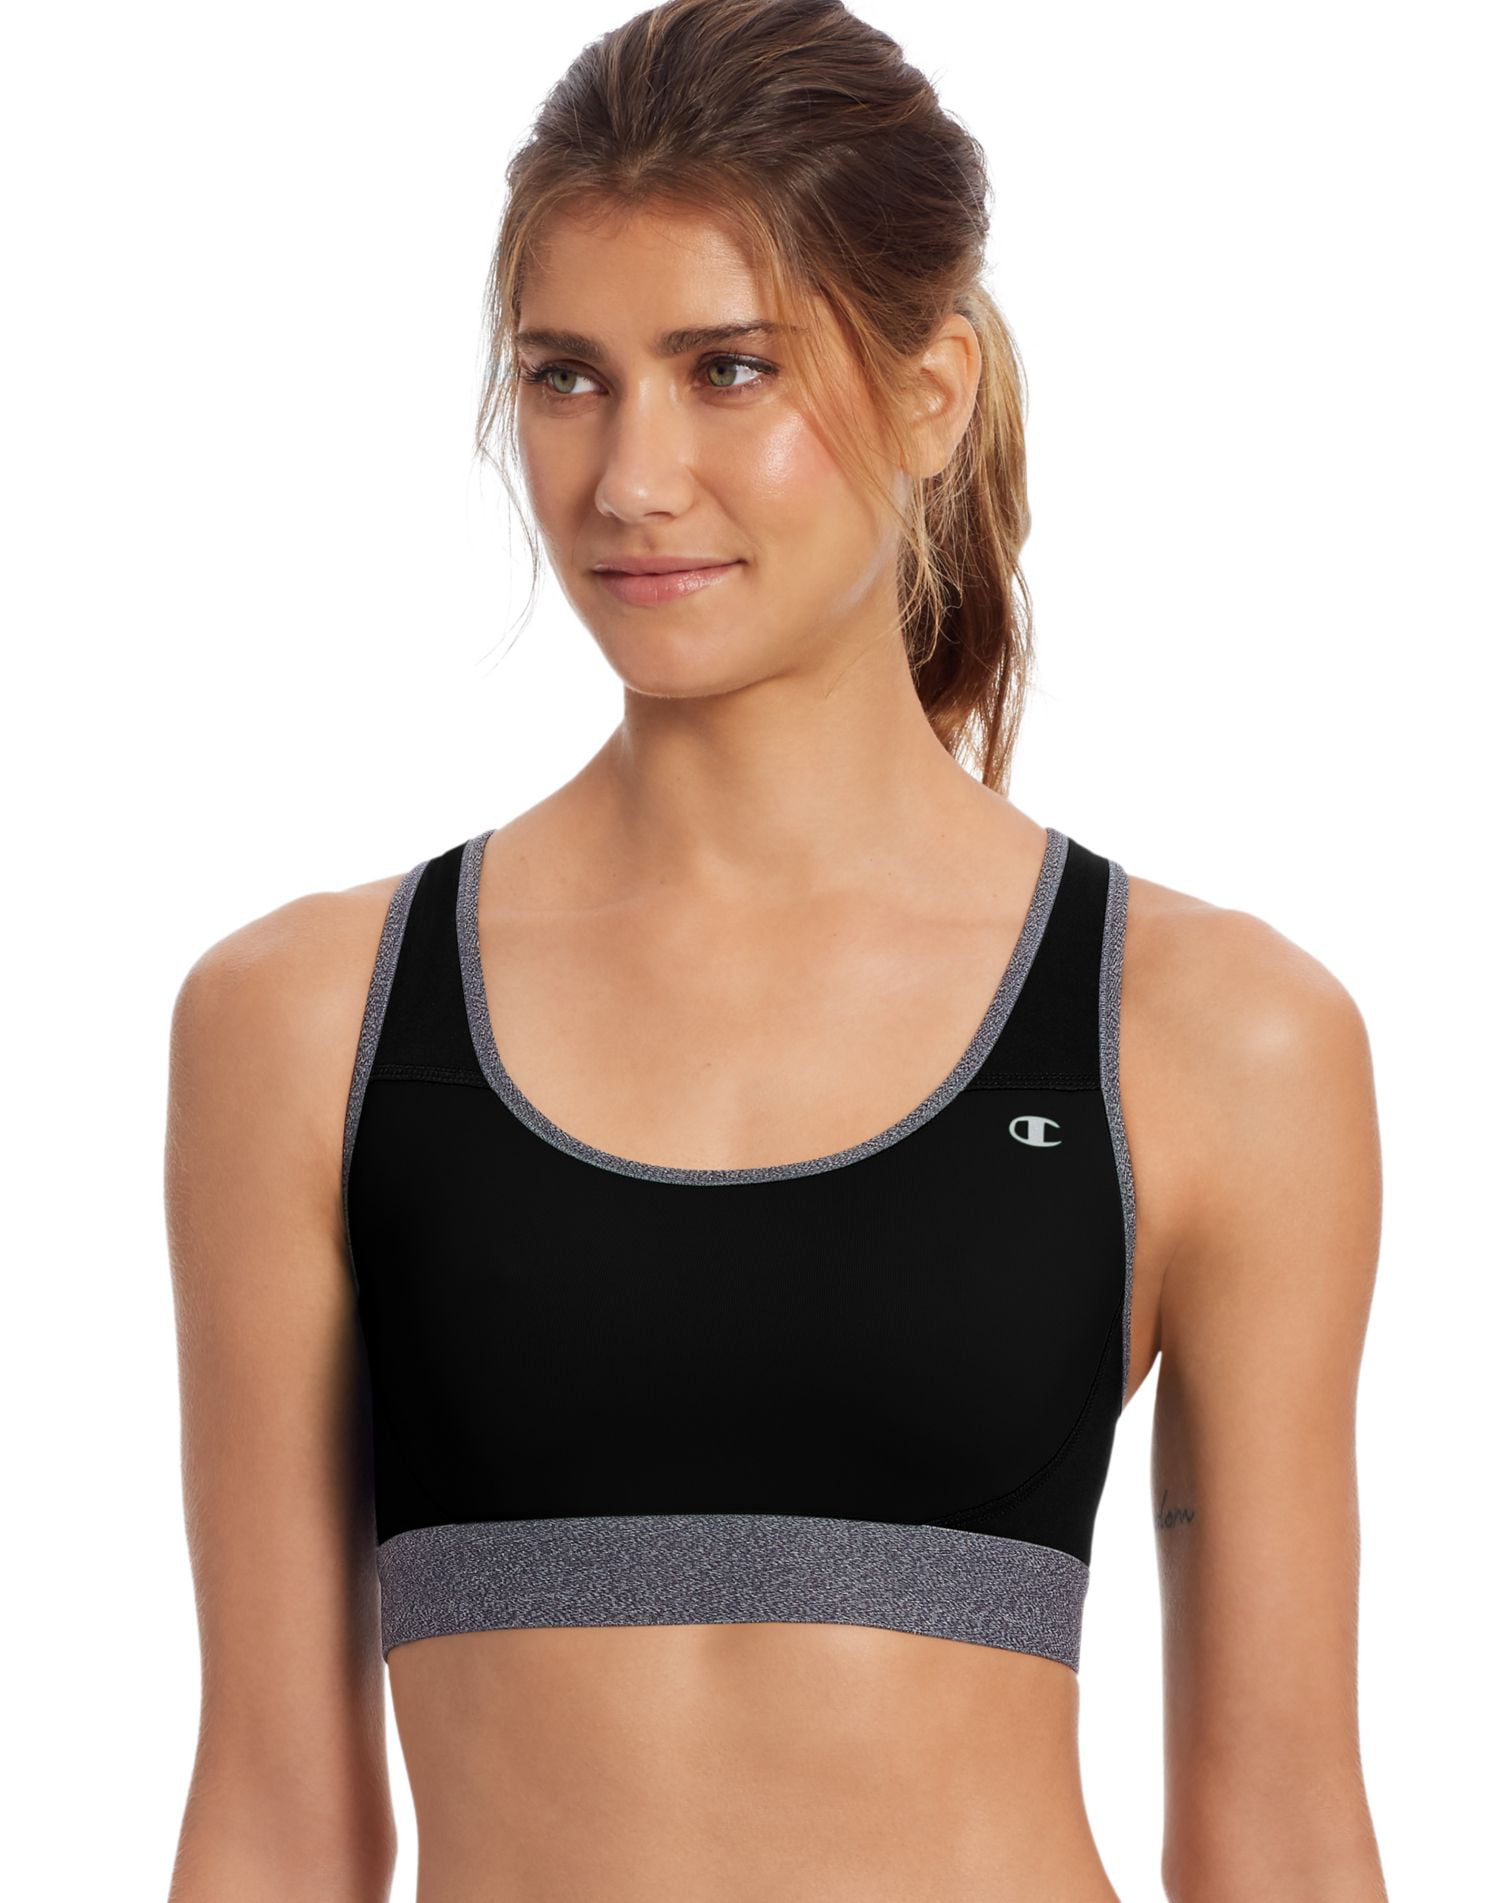 Champion Women's Double Dry Absolute Workout Sports Bra, Graphic, Black,  Small